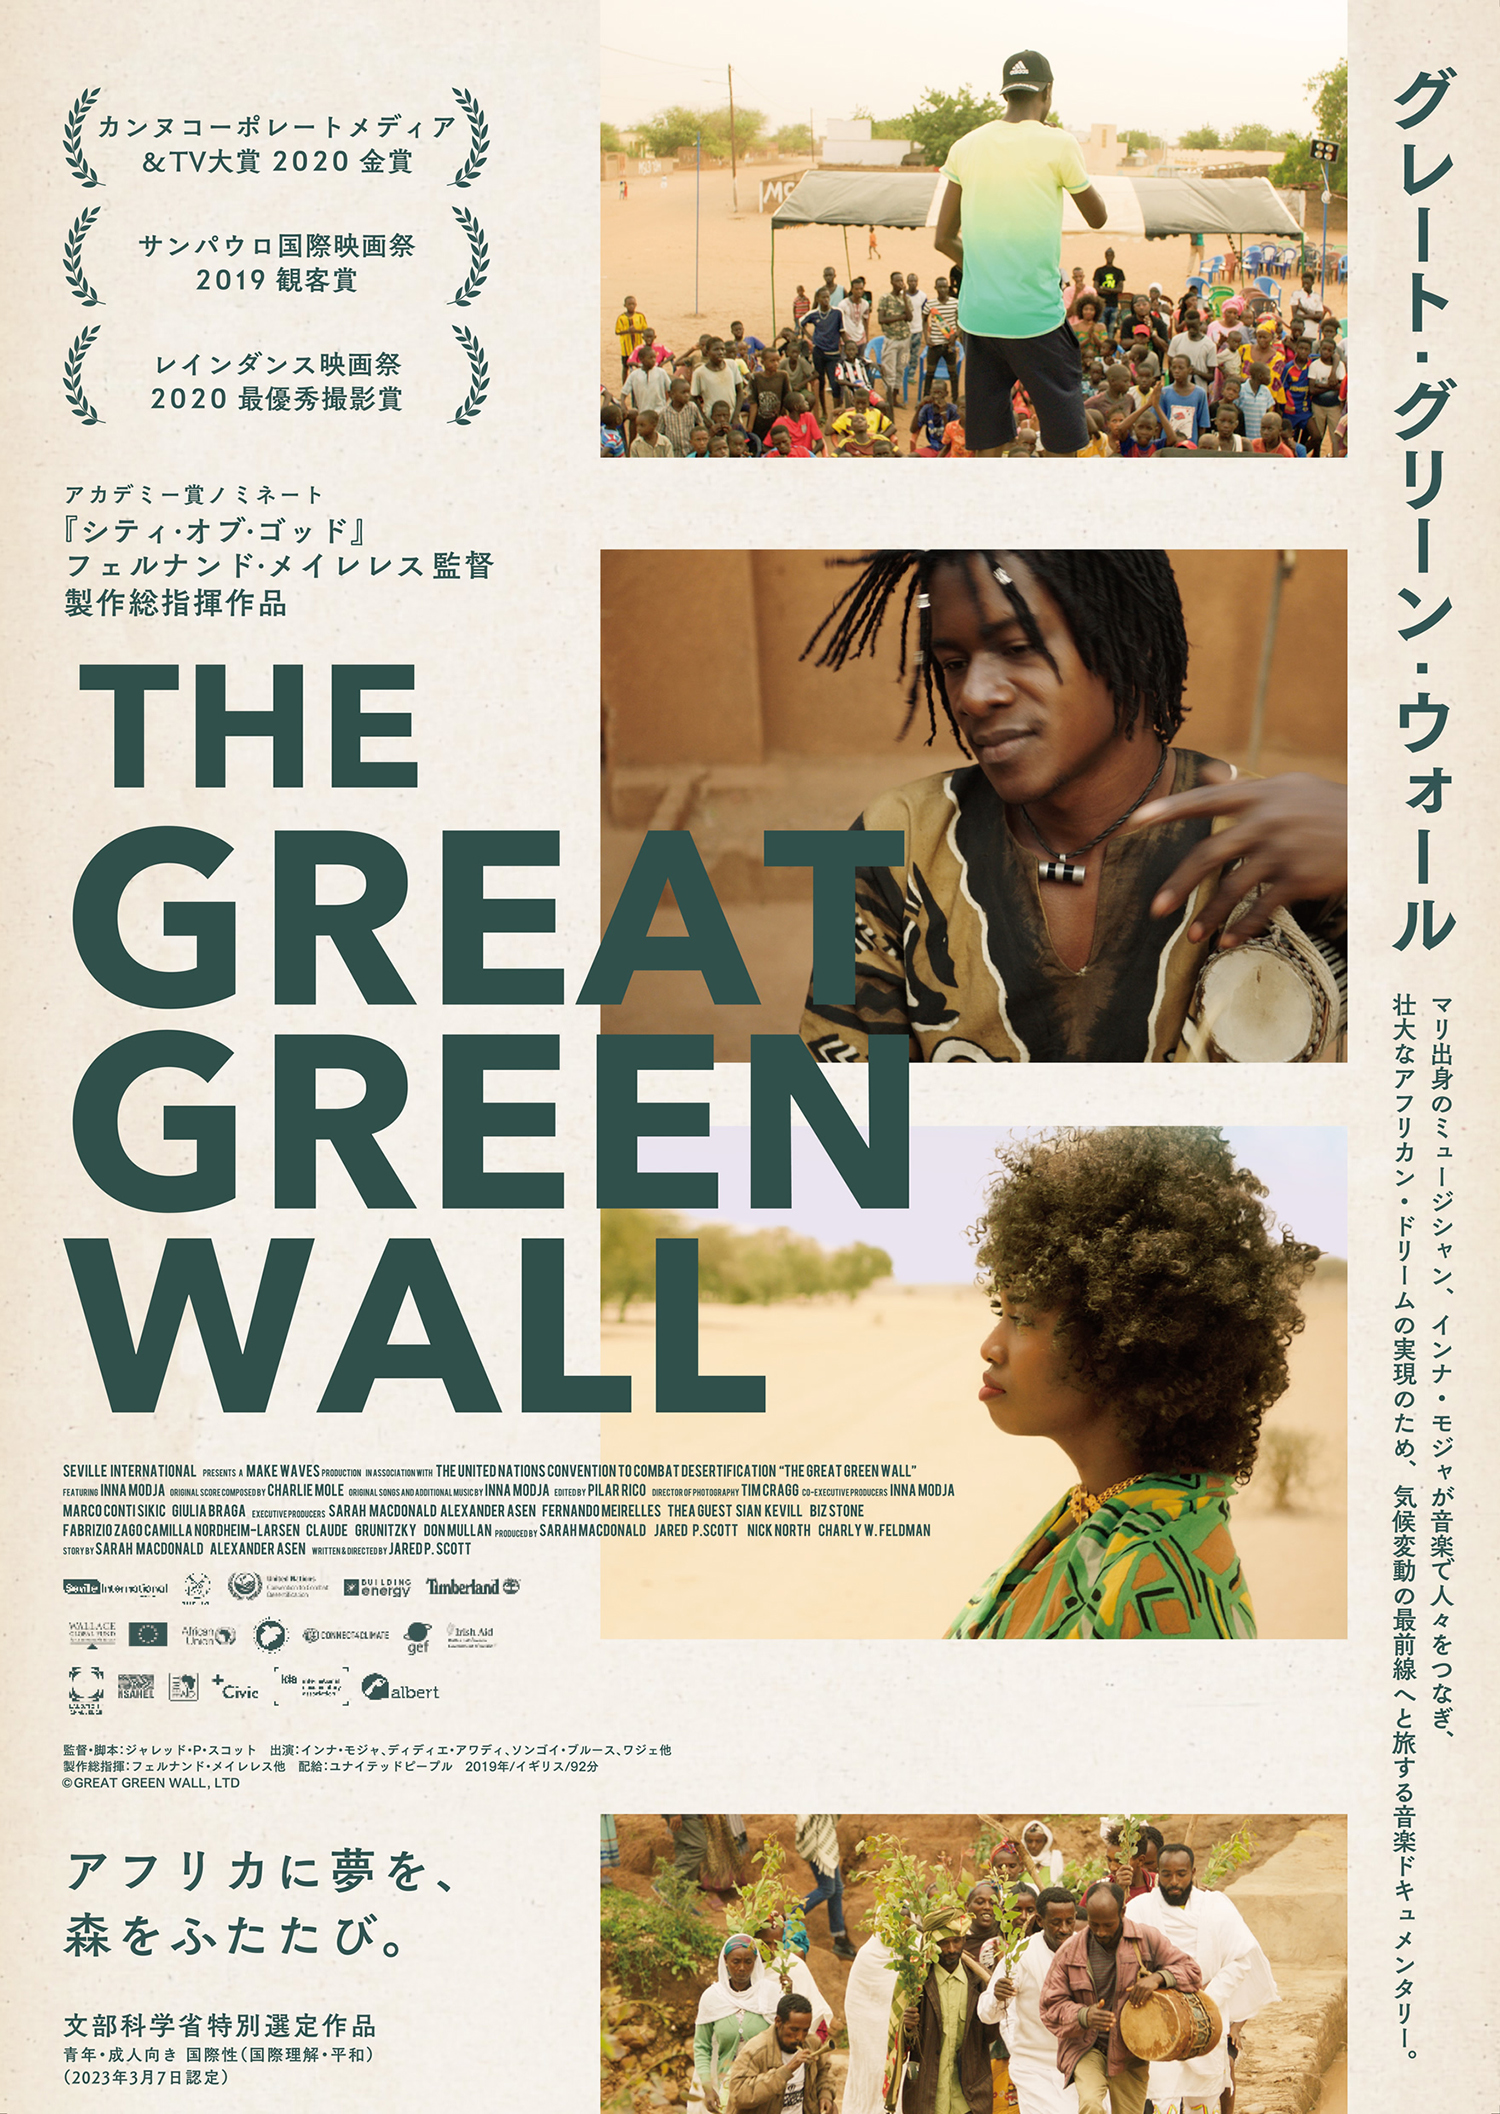 MUSIC DOCUMENTARY “THE GREAT GREEN WALL” | SWAG HOMMES